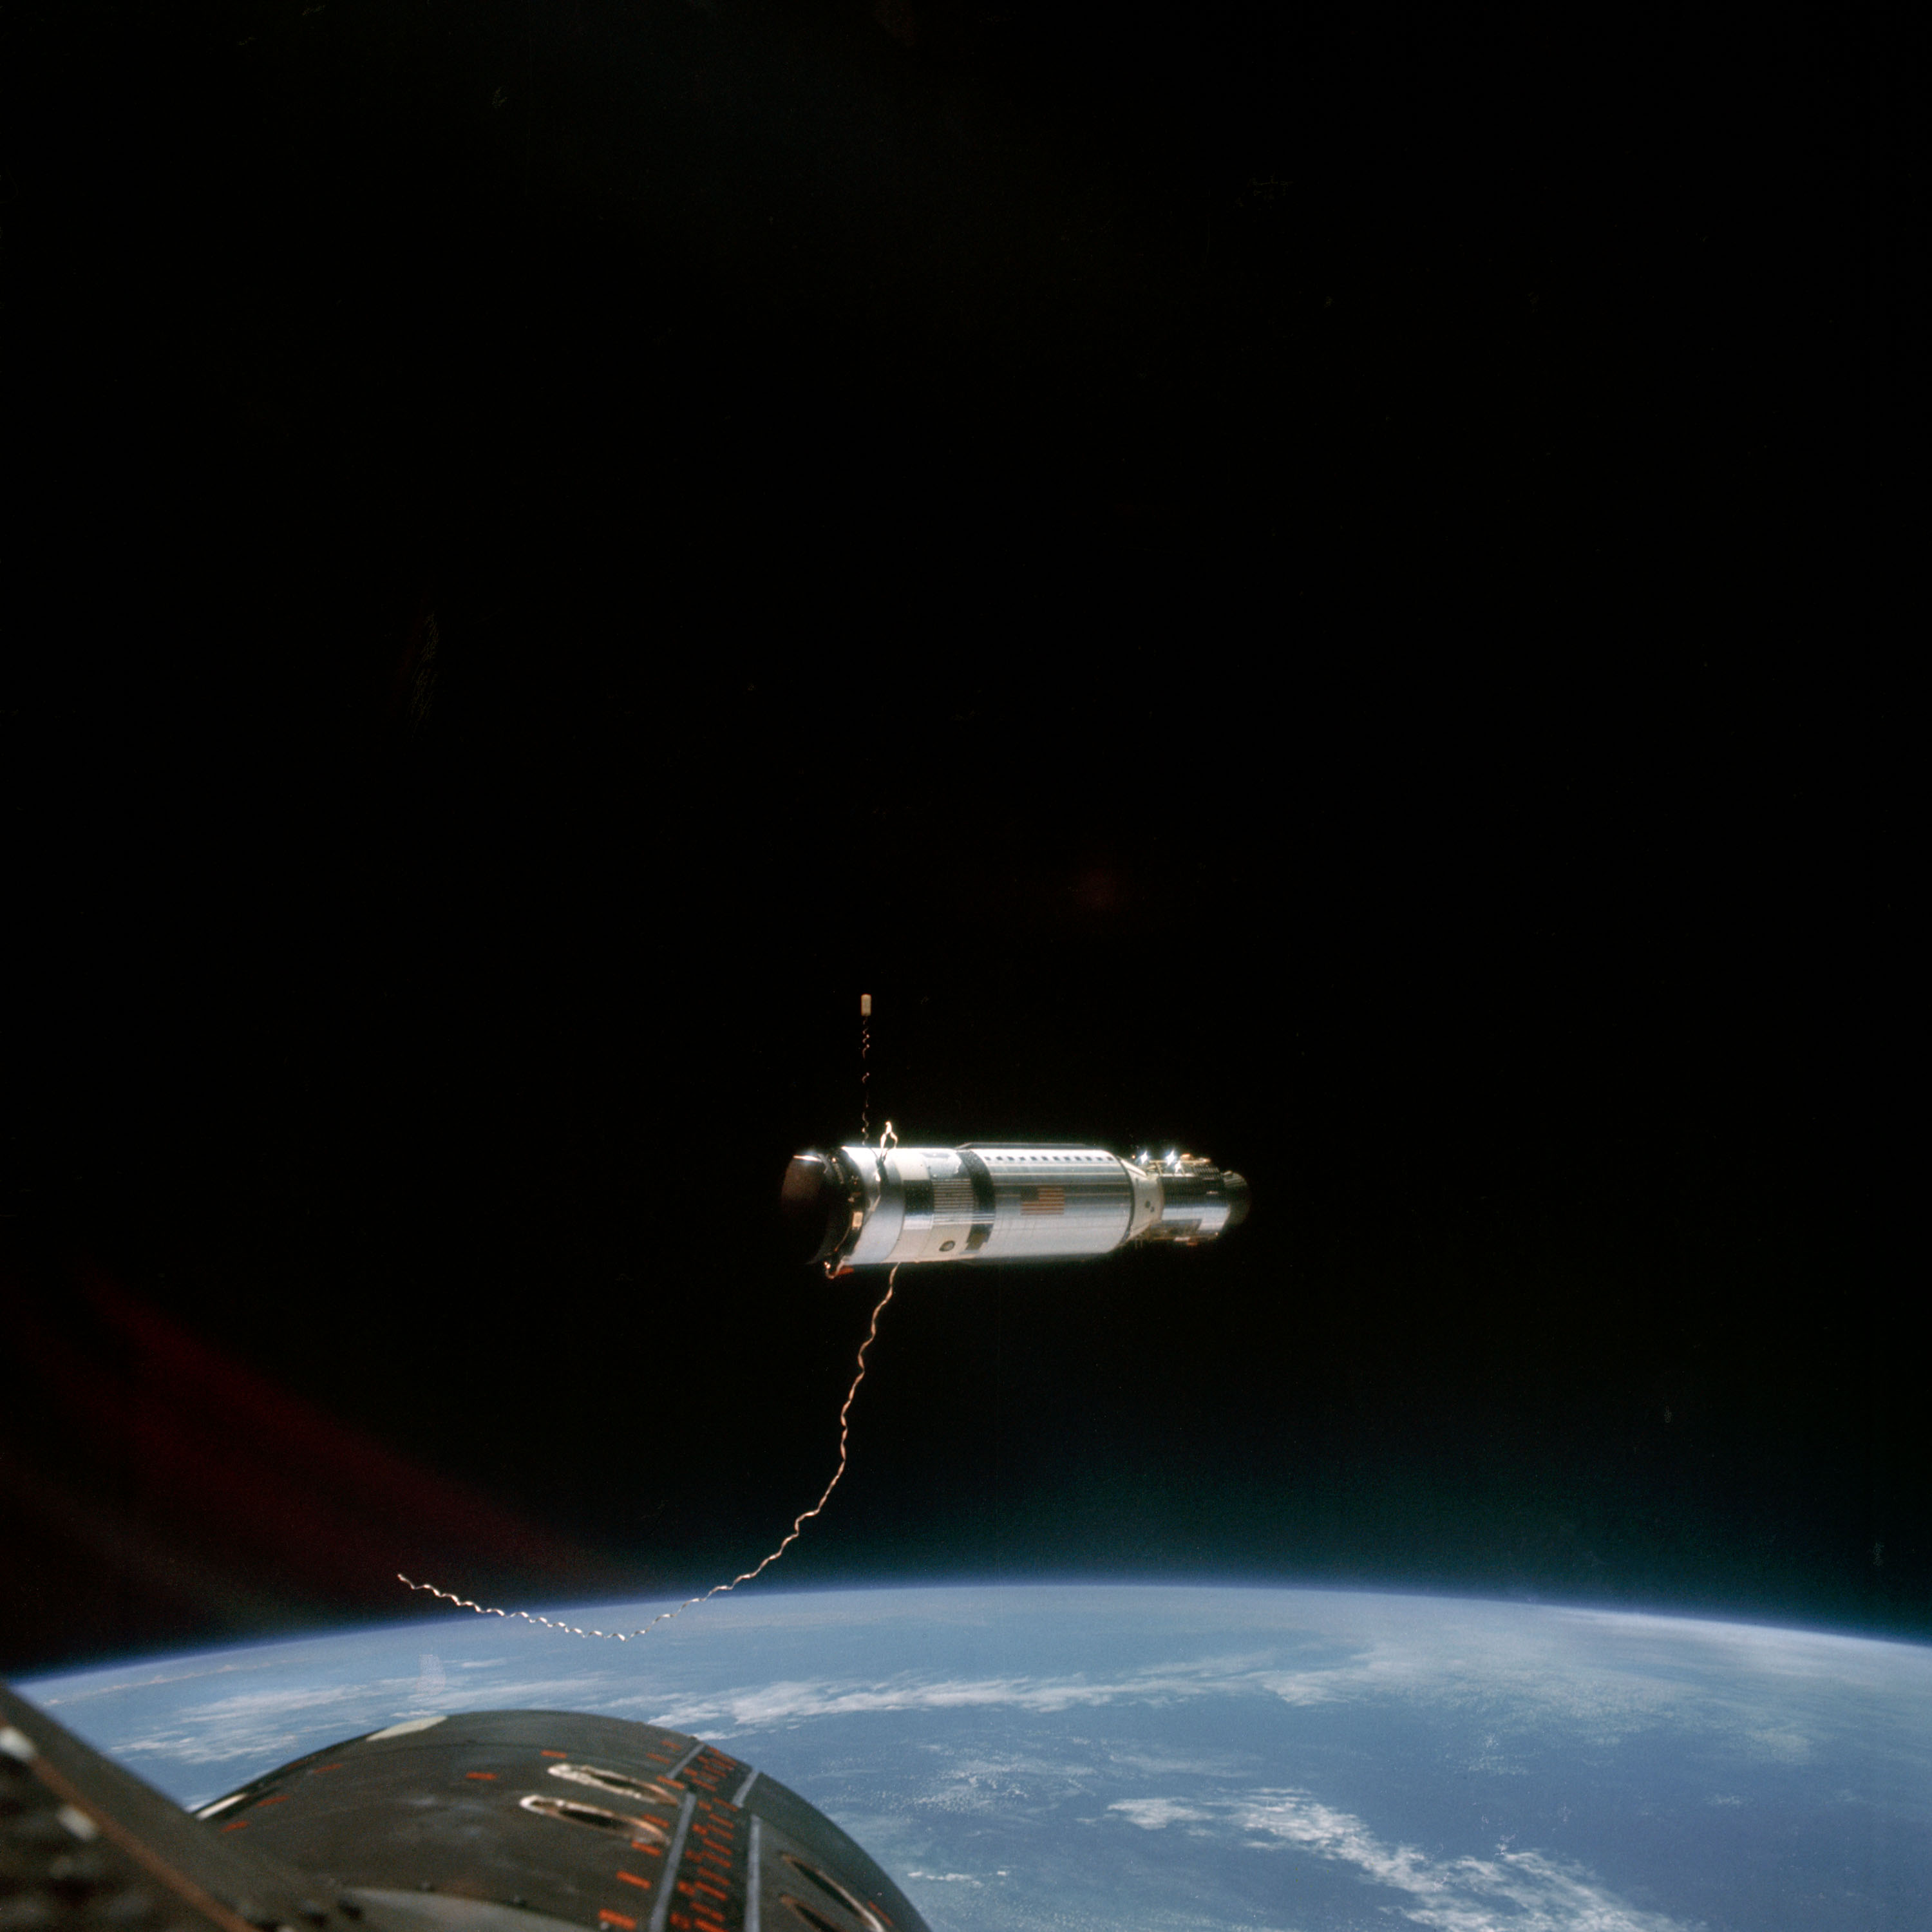 The Agena Target Docking Vehicle at a distance of approximately 80 feet from the Gemini-11 spacecraft.